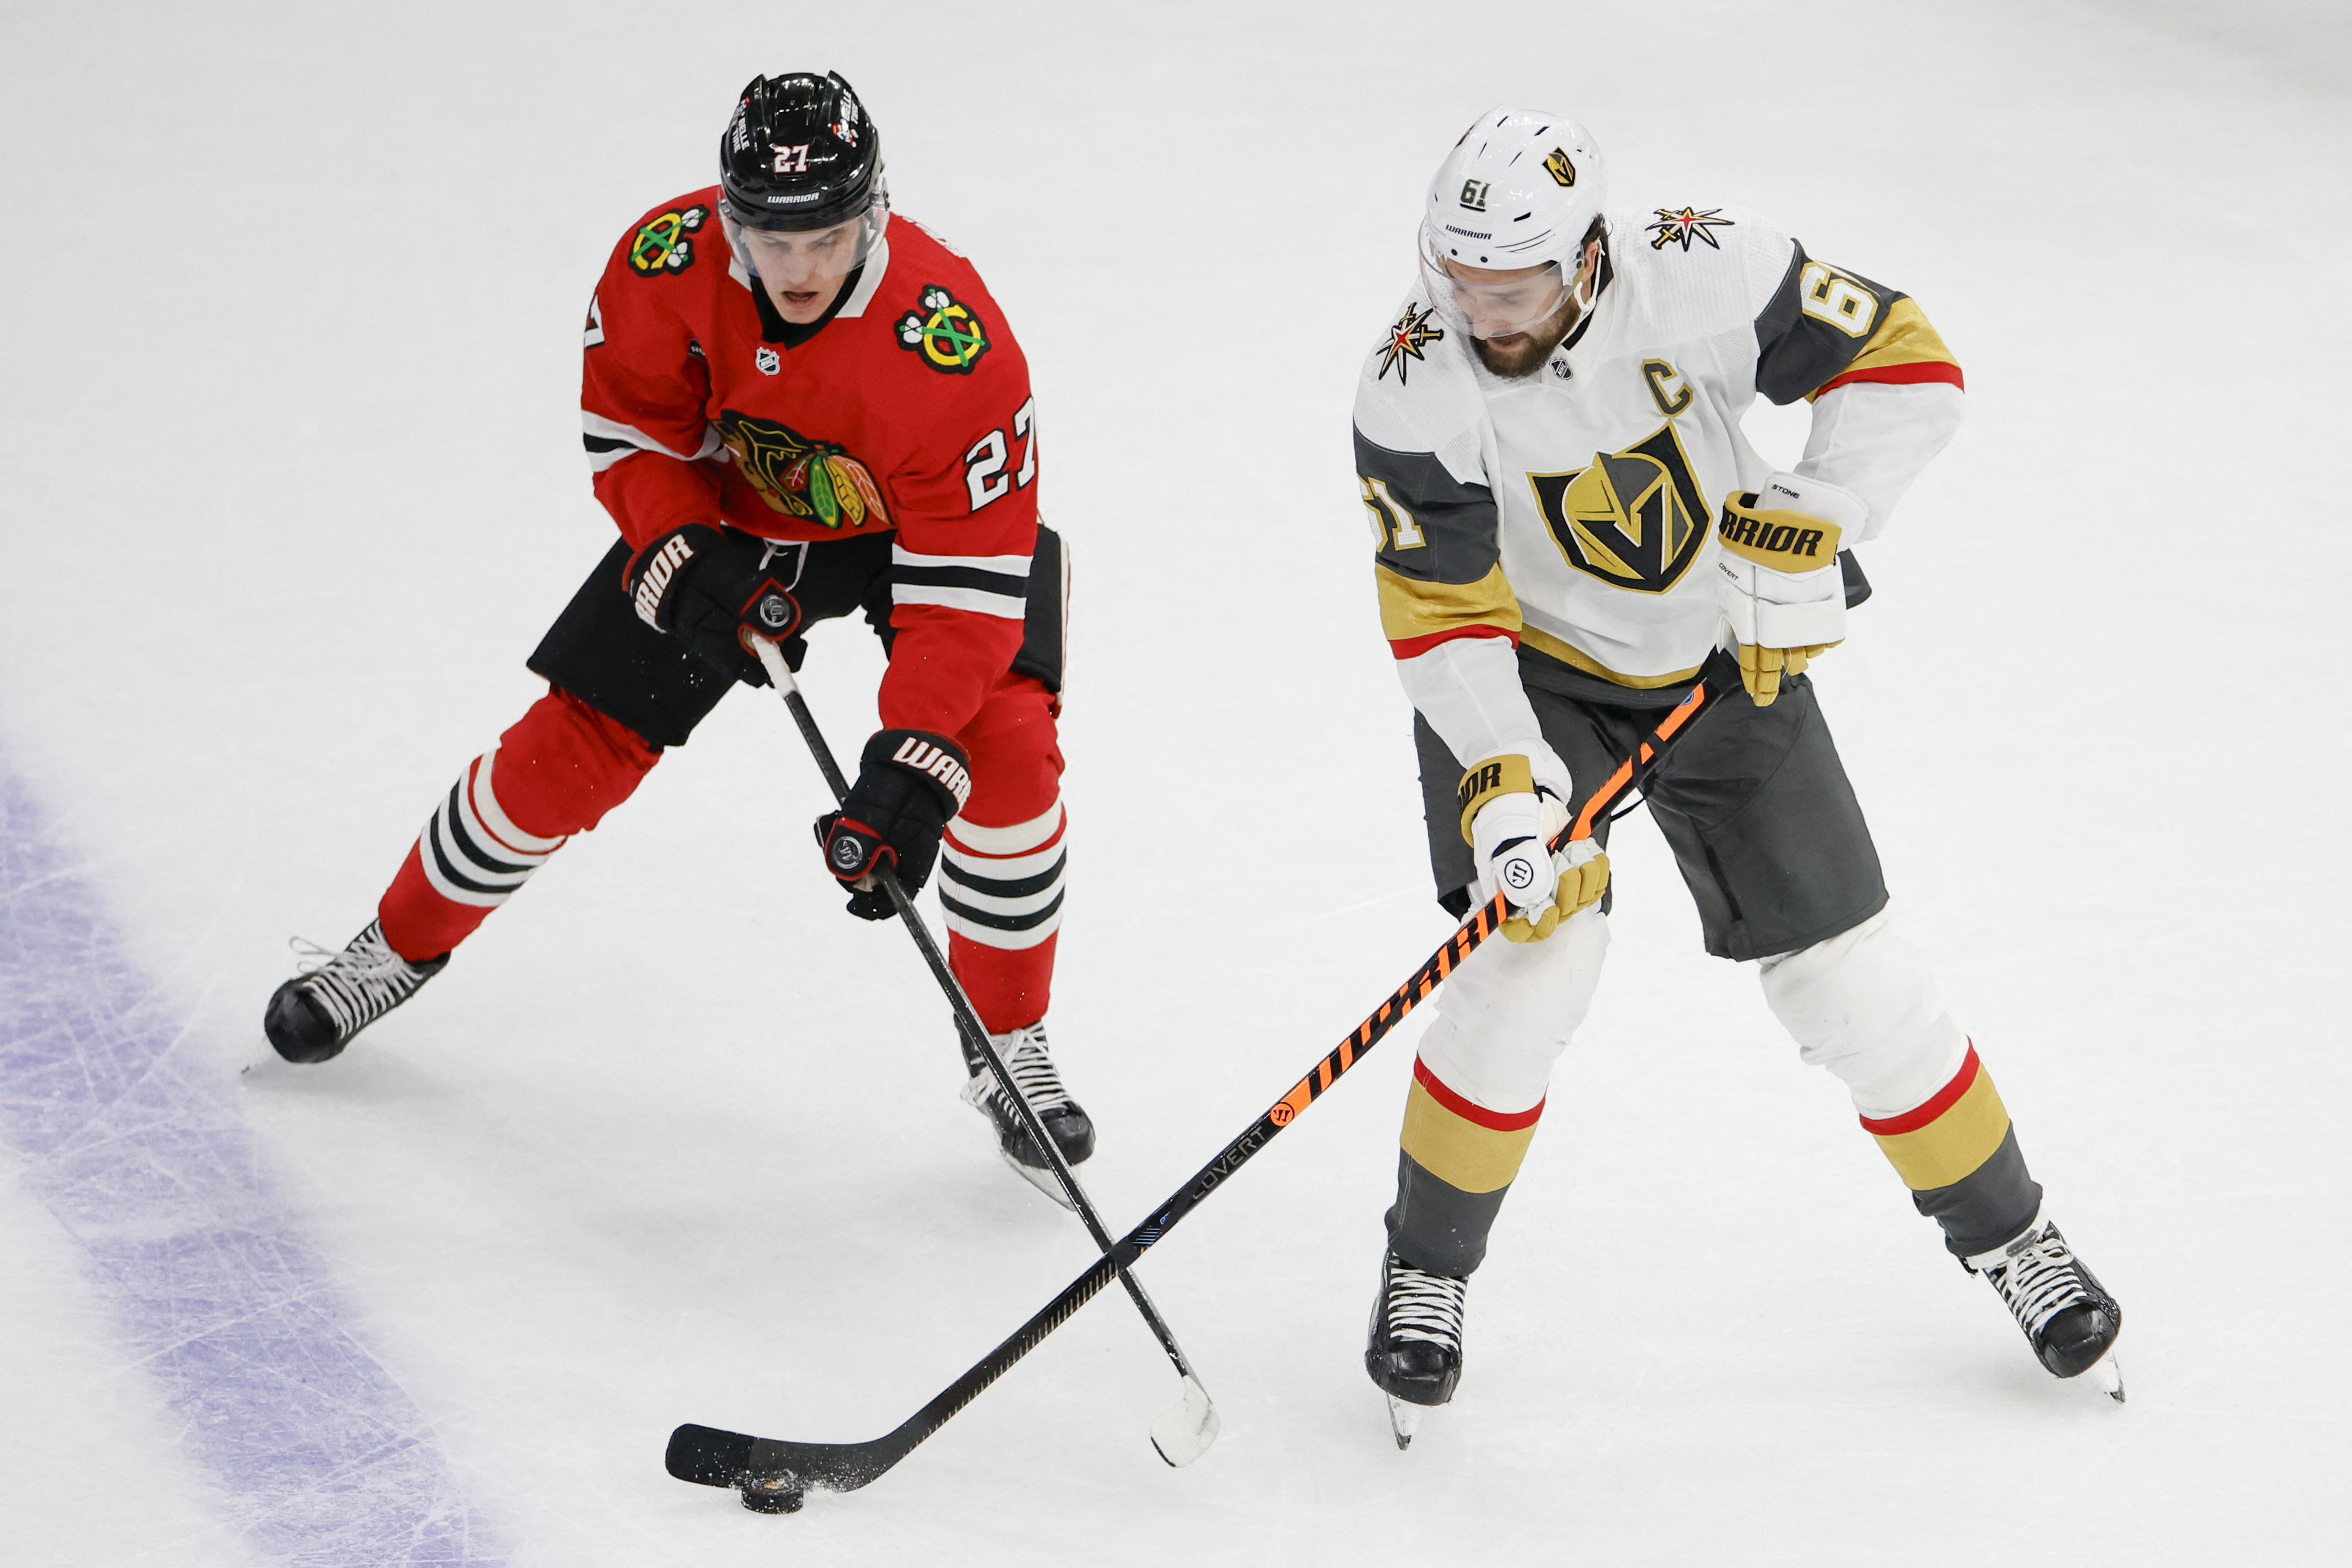 Knights 6-0 to start season after topping Blackhawks